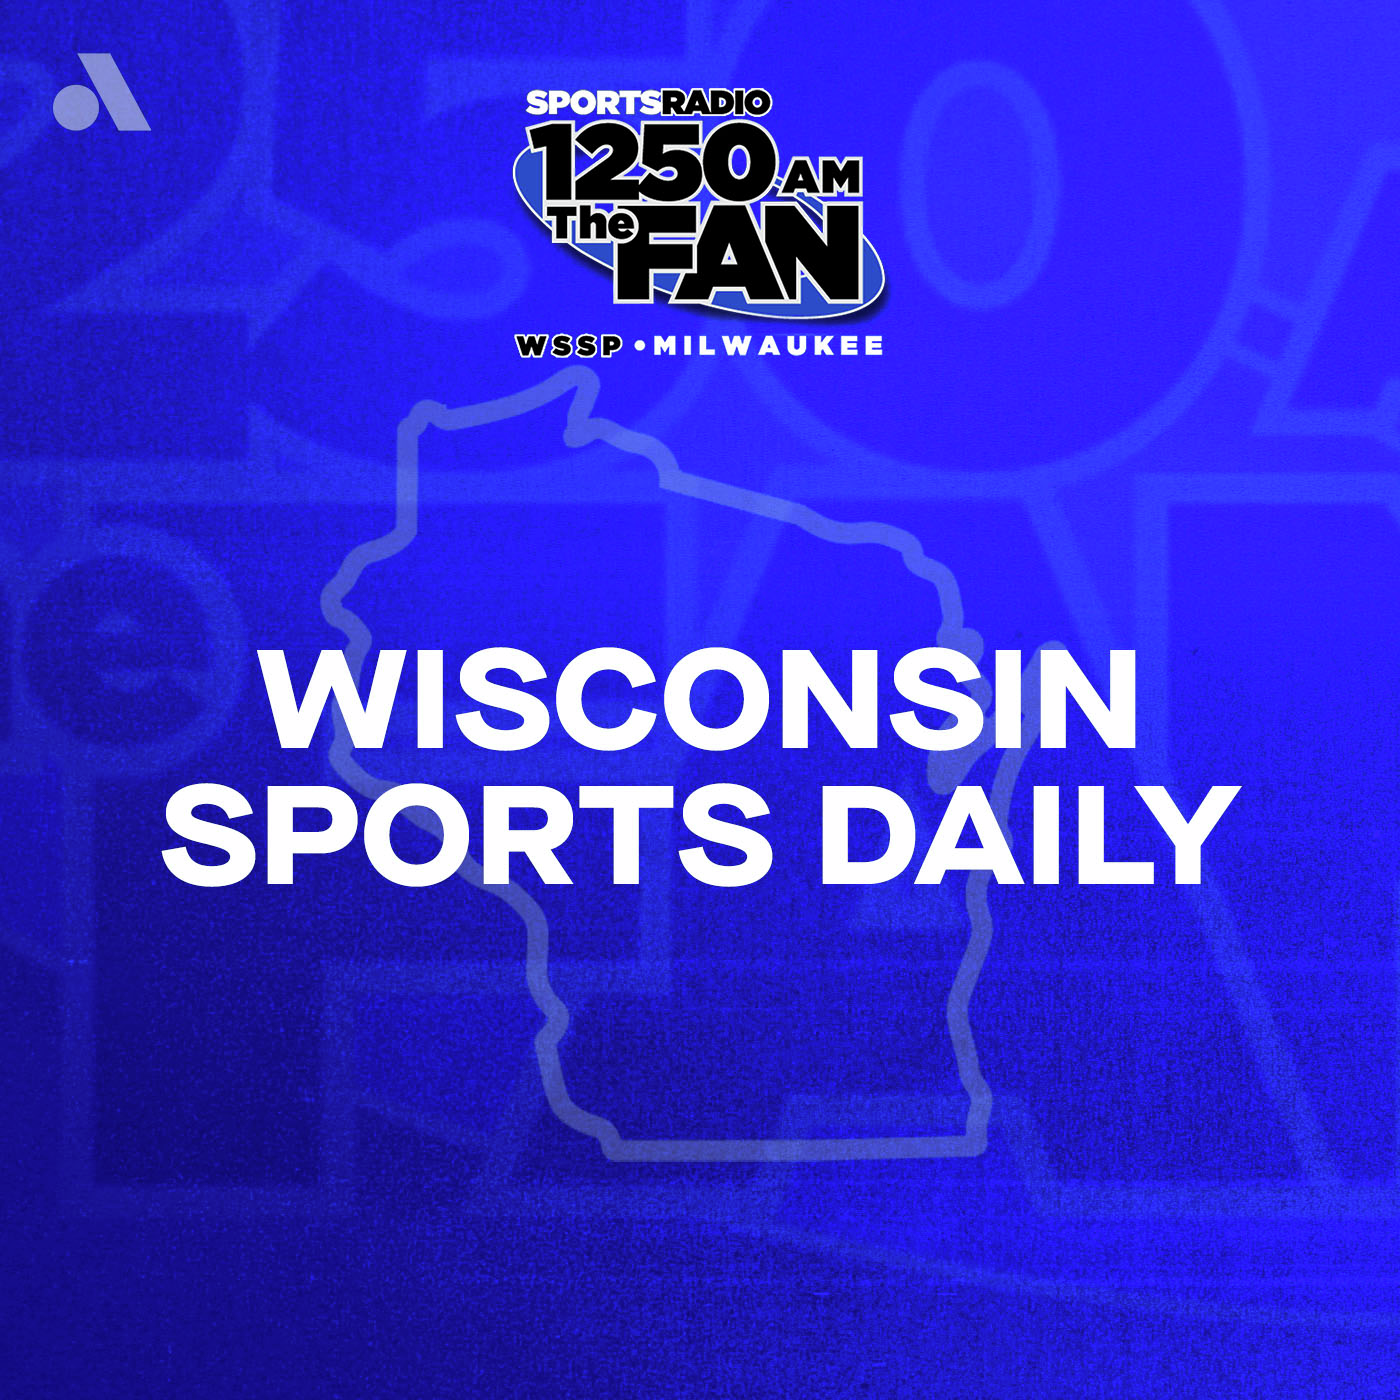 Wednesday, June 26th: College World Series Champ Nate Snead Joins Wisconsin Sports Daily!